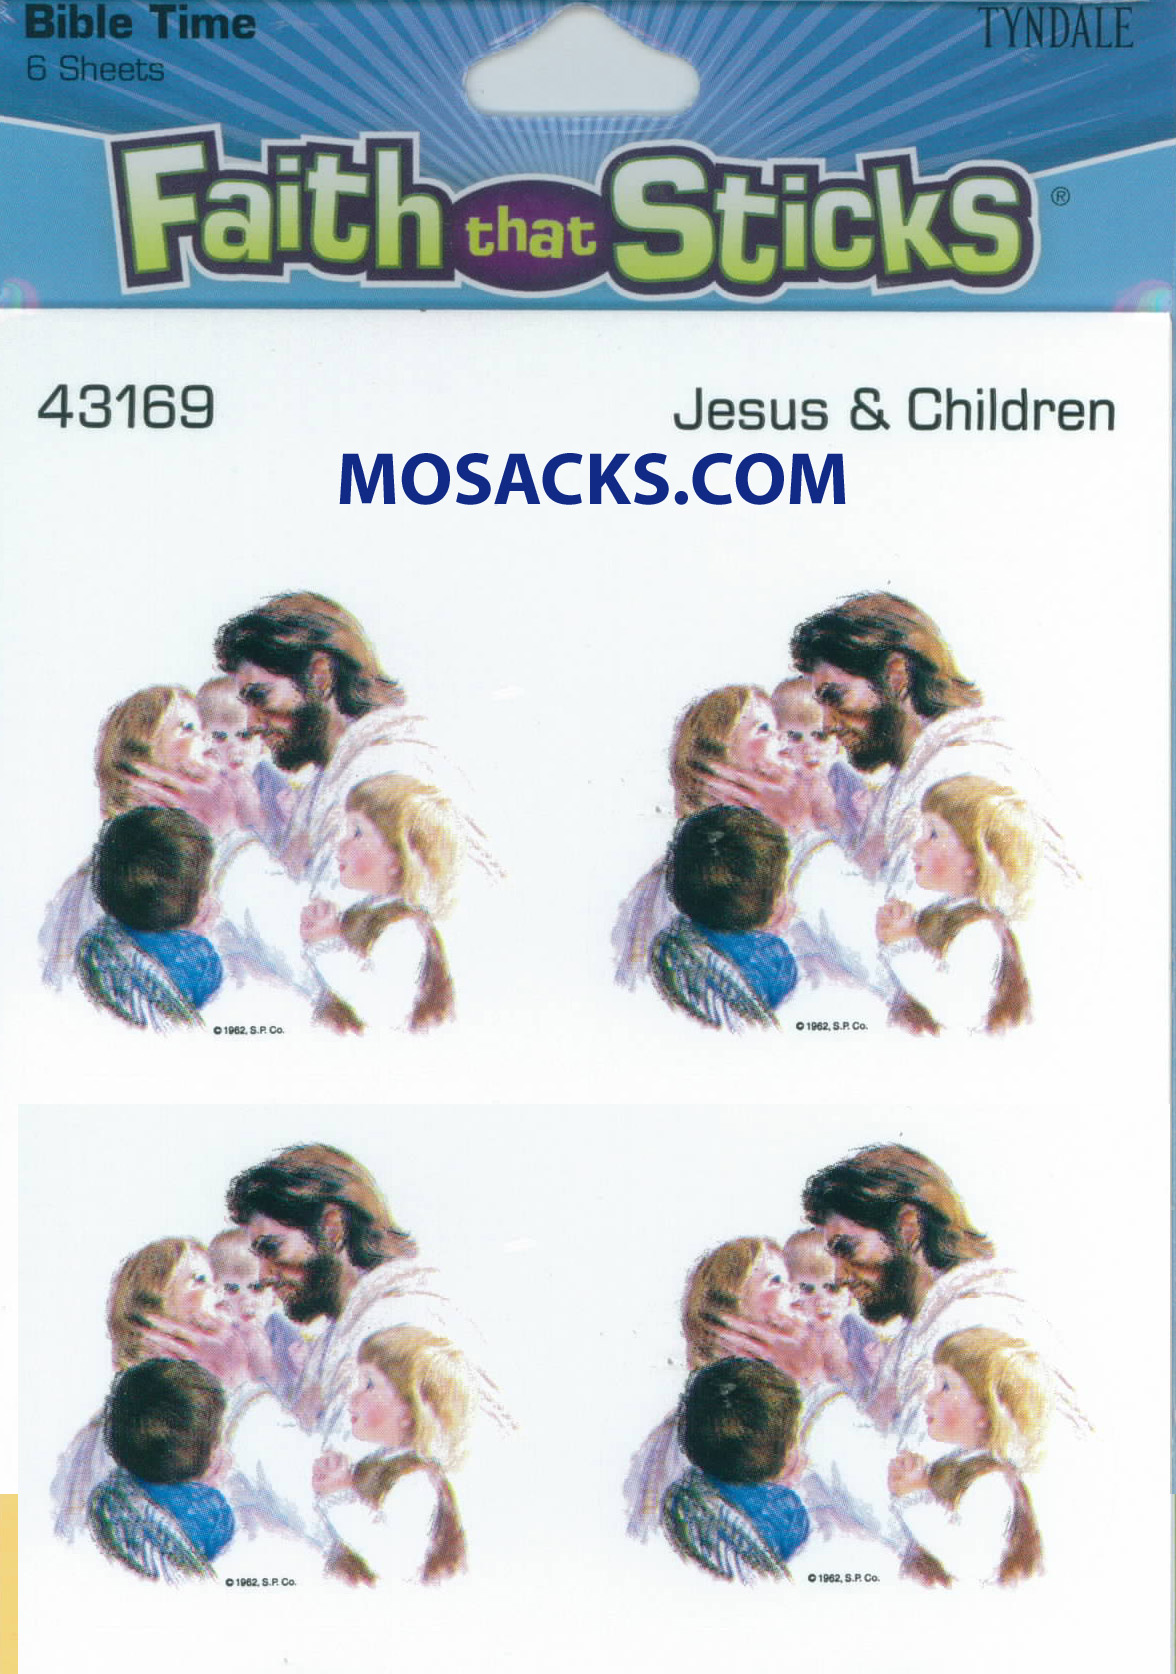 Christian Stickers & Catholic Stickers Faith That Sticks Jesus And Children 87-43169 includes 6 Jesus and Children sticker sheets